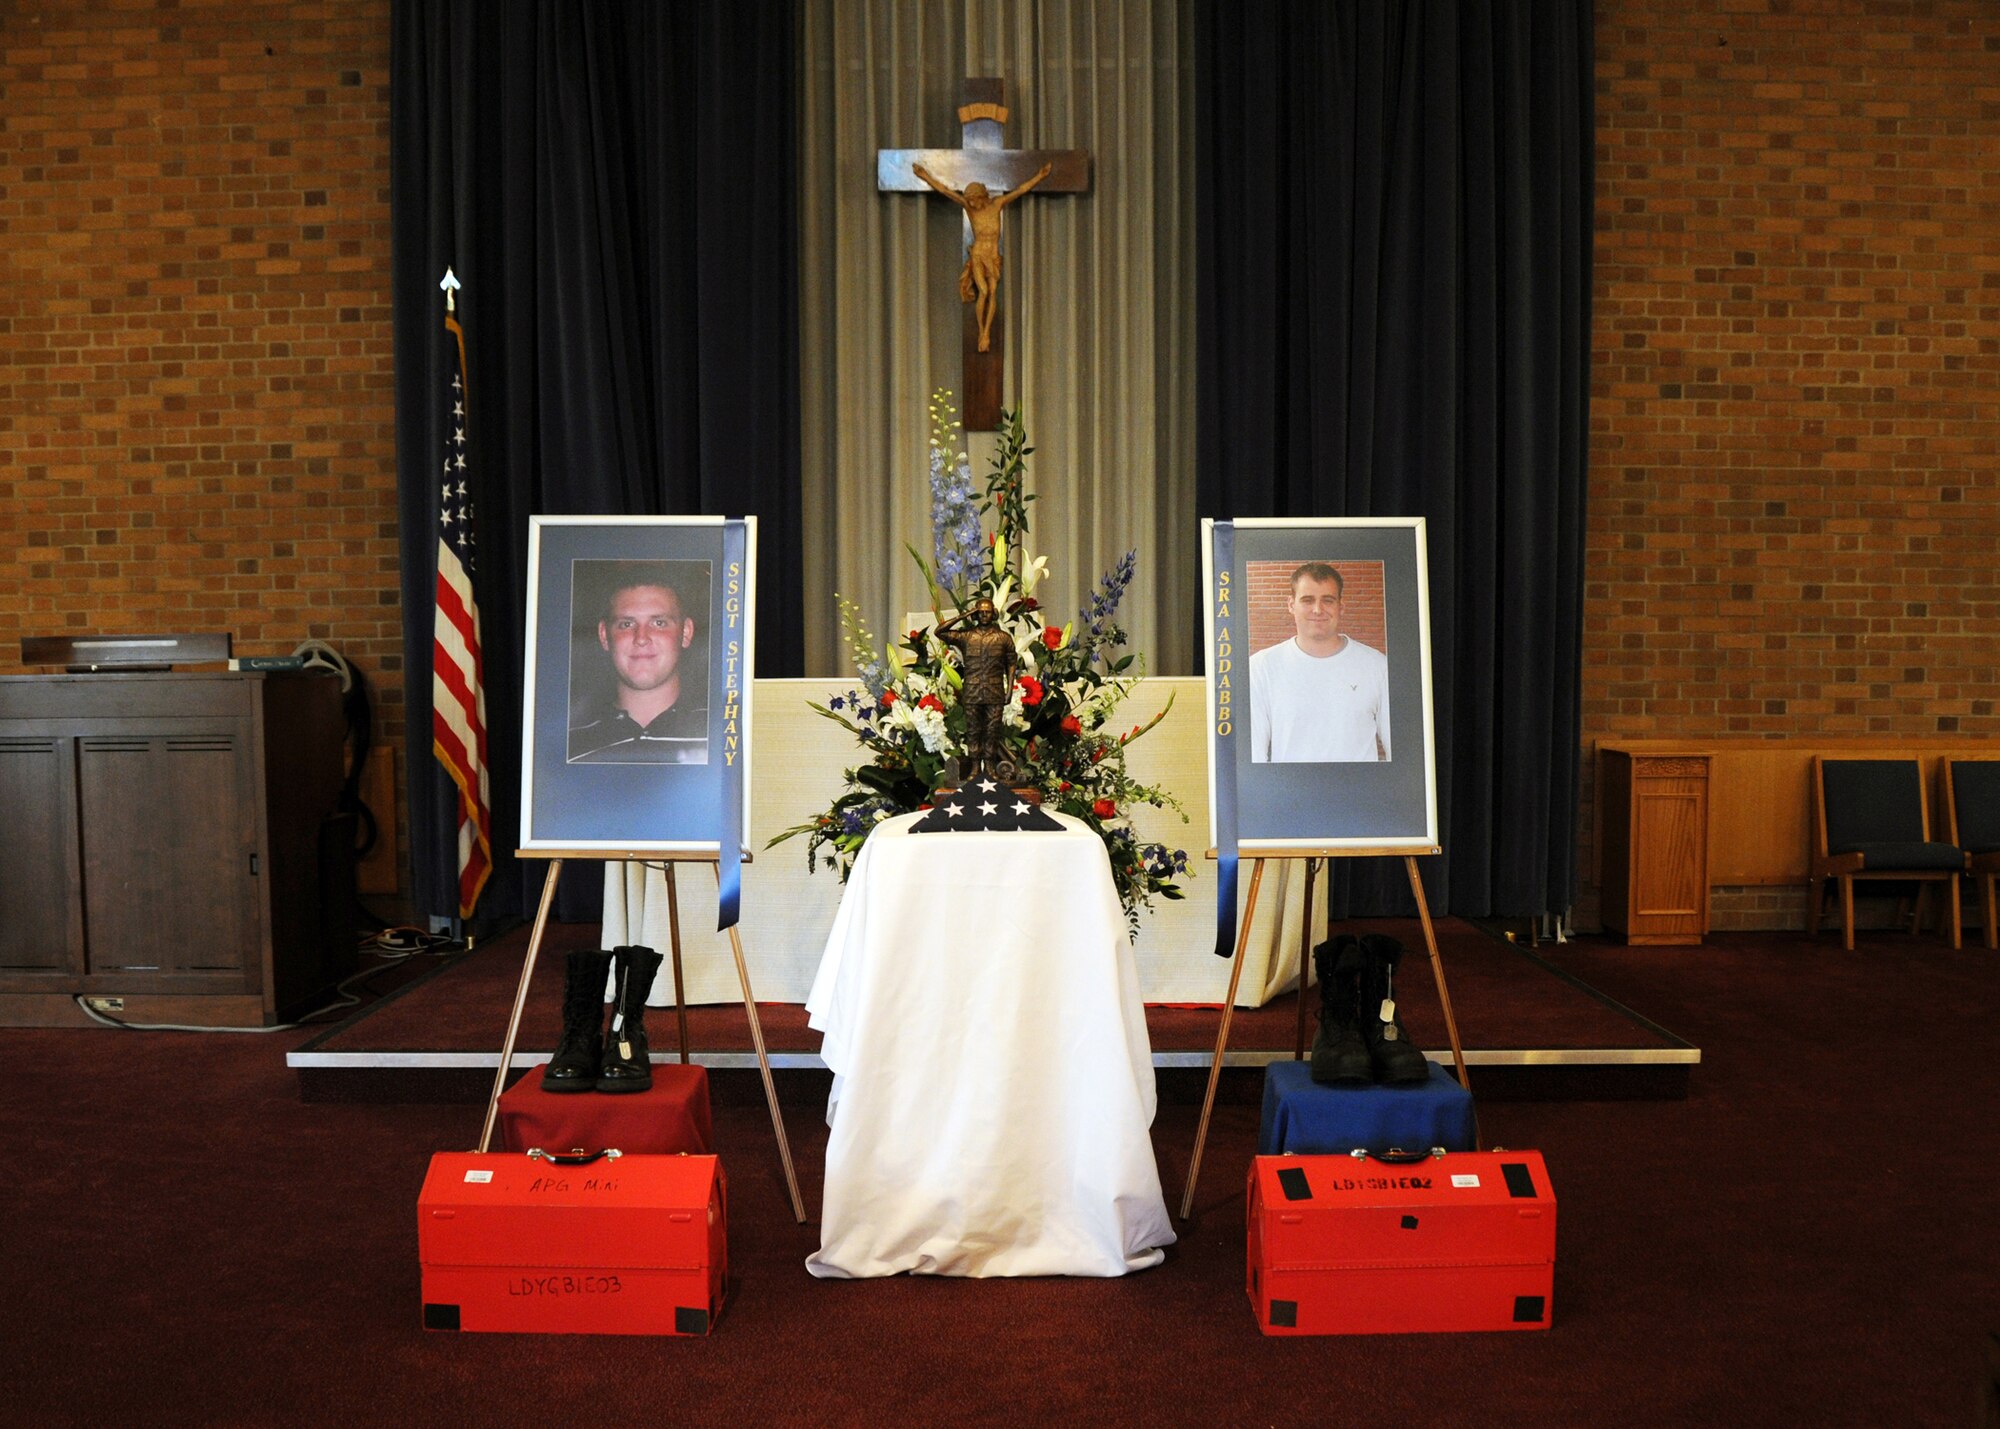 A display created by the 48th Aircraft Maintenance Squadron for the memorial service of Staff Sgt. Mark Stephany and Senior Airman Daniel Addabbo at the RAF Lakenheath Chapel June 5, 2009. Sergeant Stephany and Airman Addabbo lost their lives in a vehicle accident May 30. (U.S. Air Force photo by Senior Airman Kristopher Levasseur) 